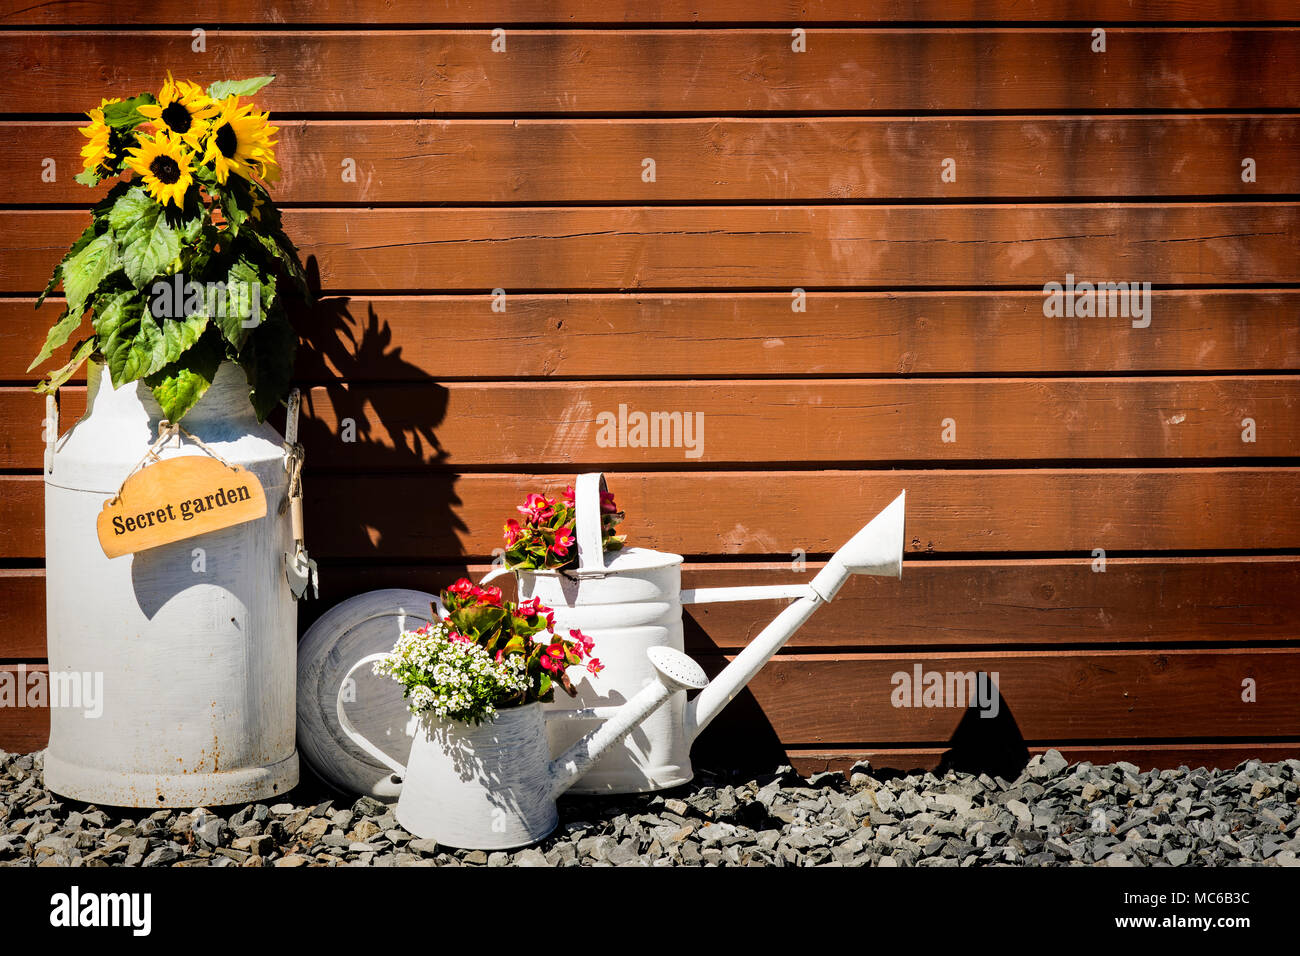 Flowers in watering can on wood background with label. Stock Photo